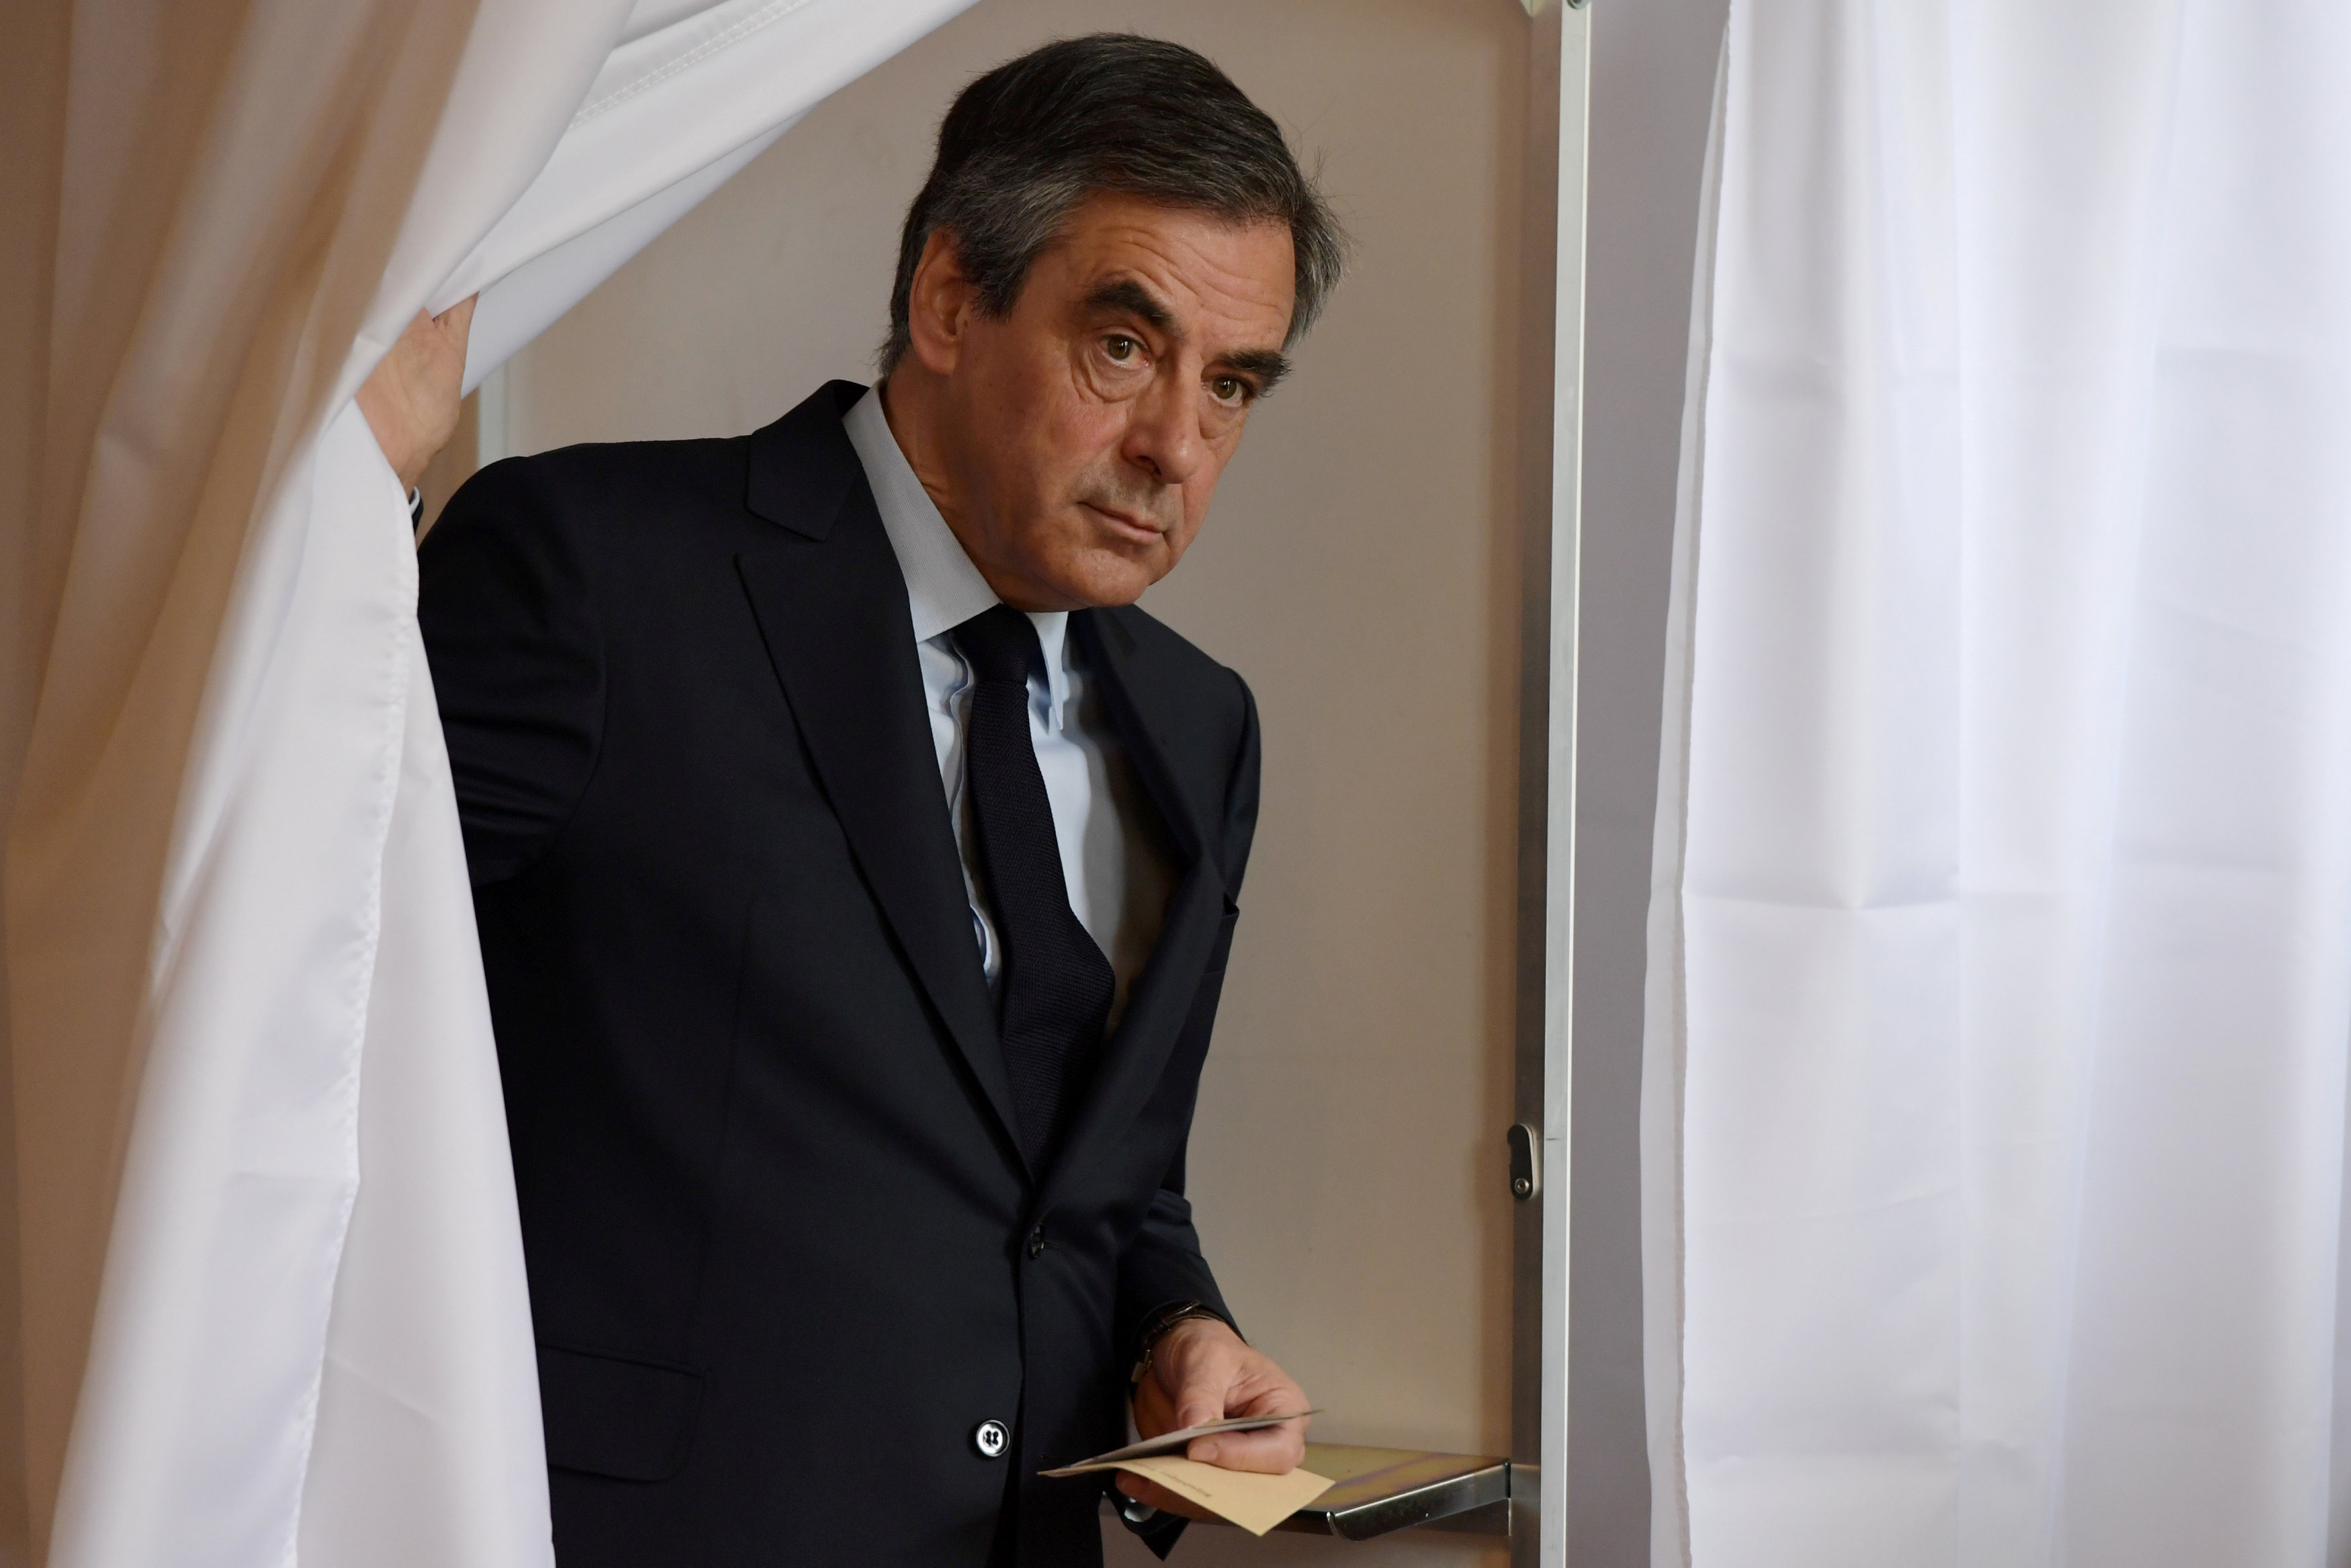 2017 04 23T103215Z 1929617912 RC1BE7206600 RTRMADP 3 FRANCE ELECTION FILLON